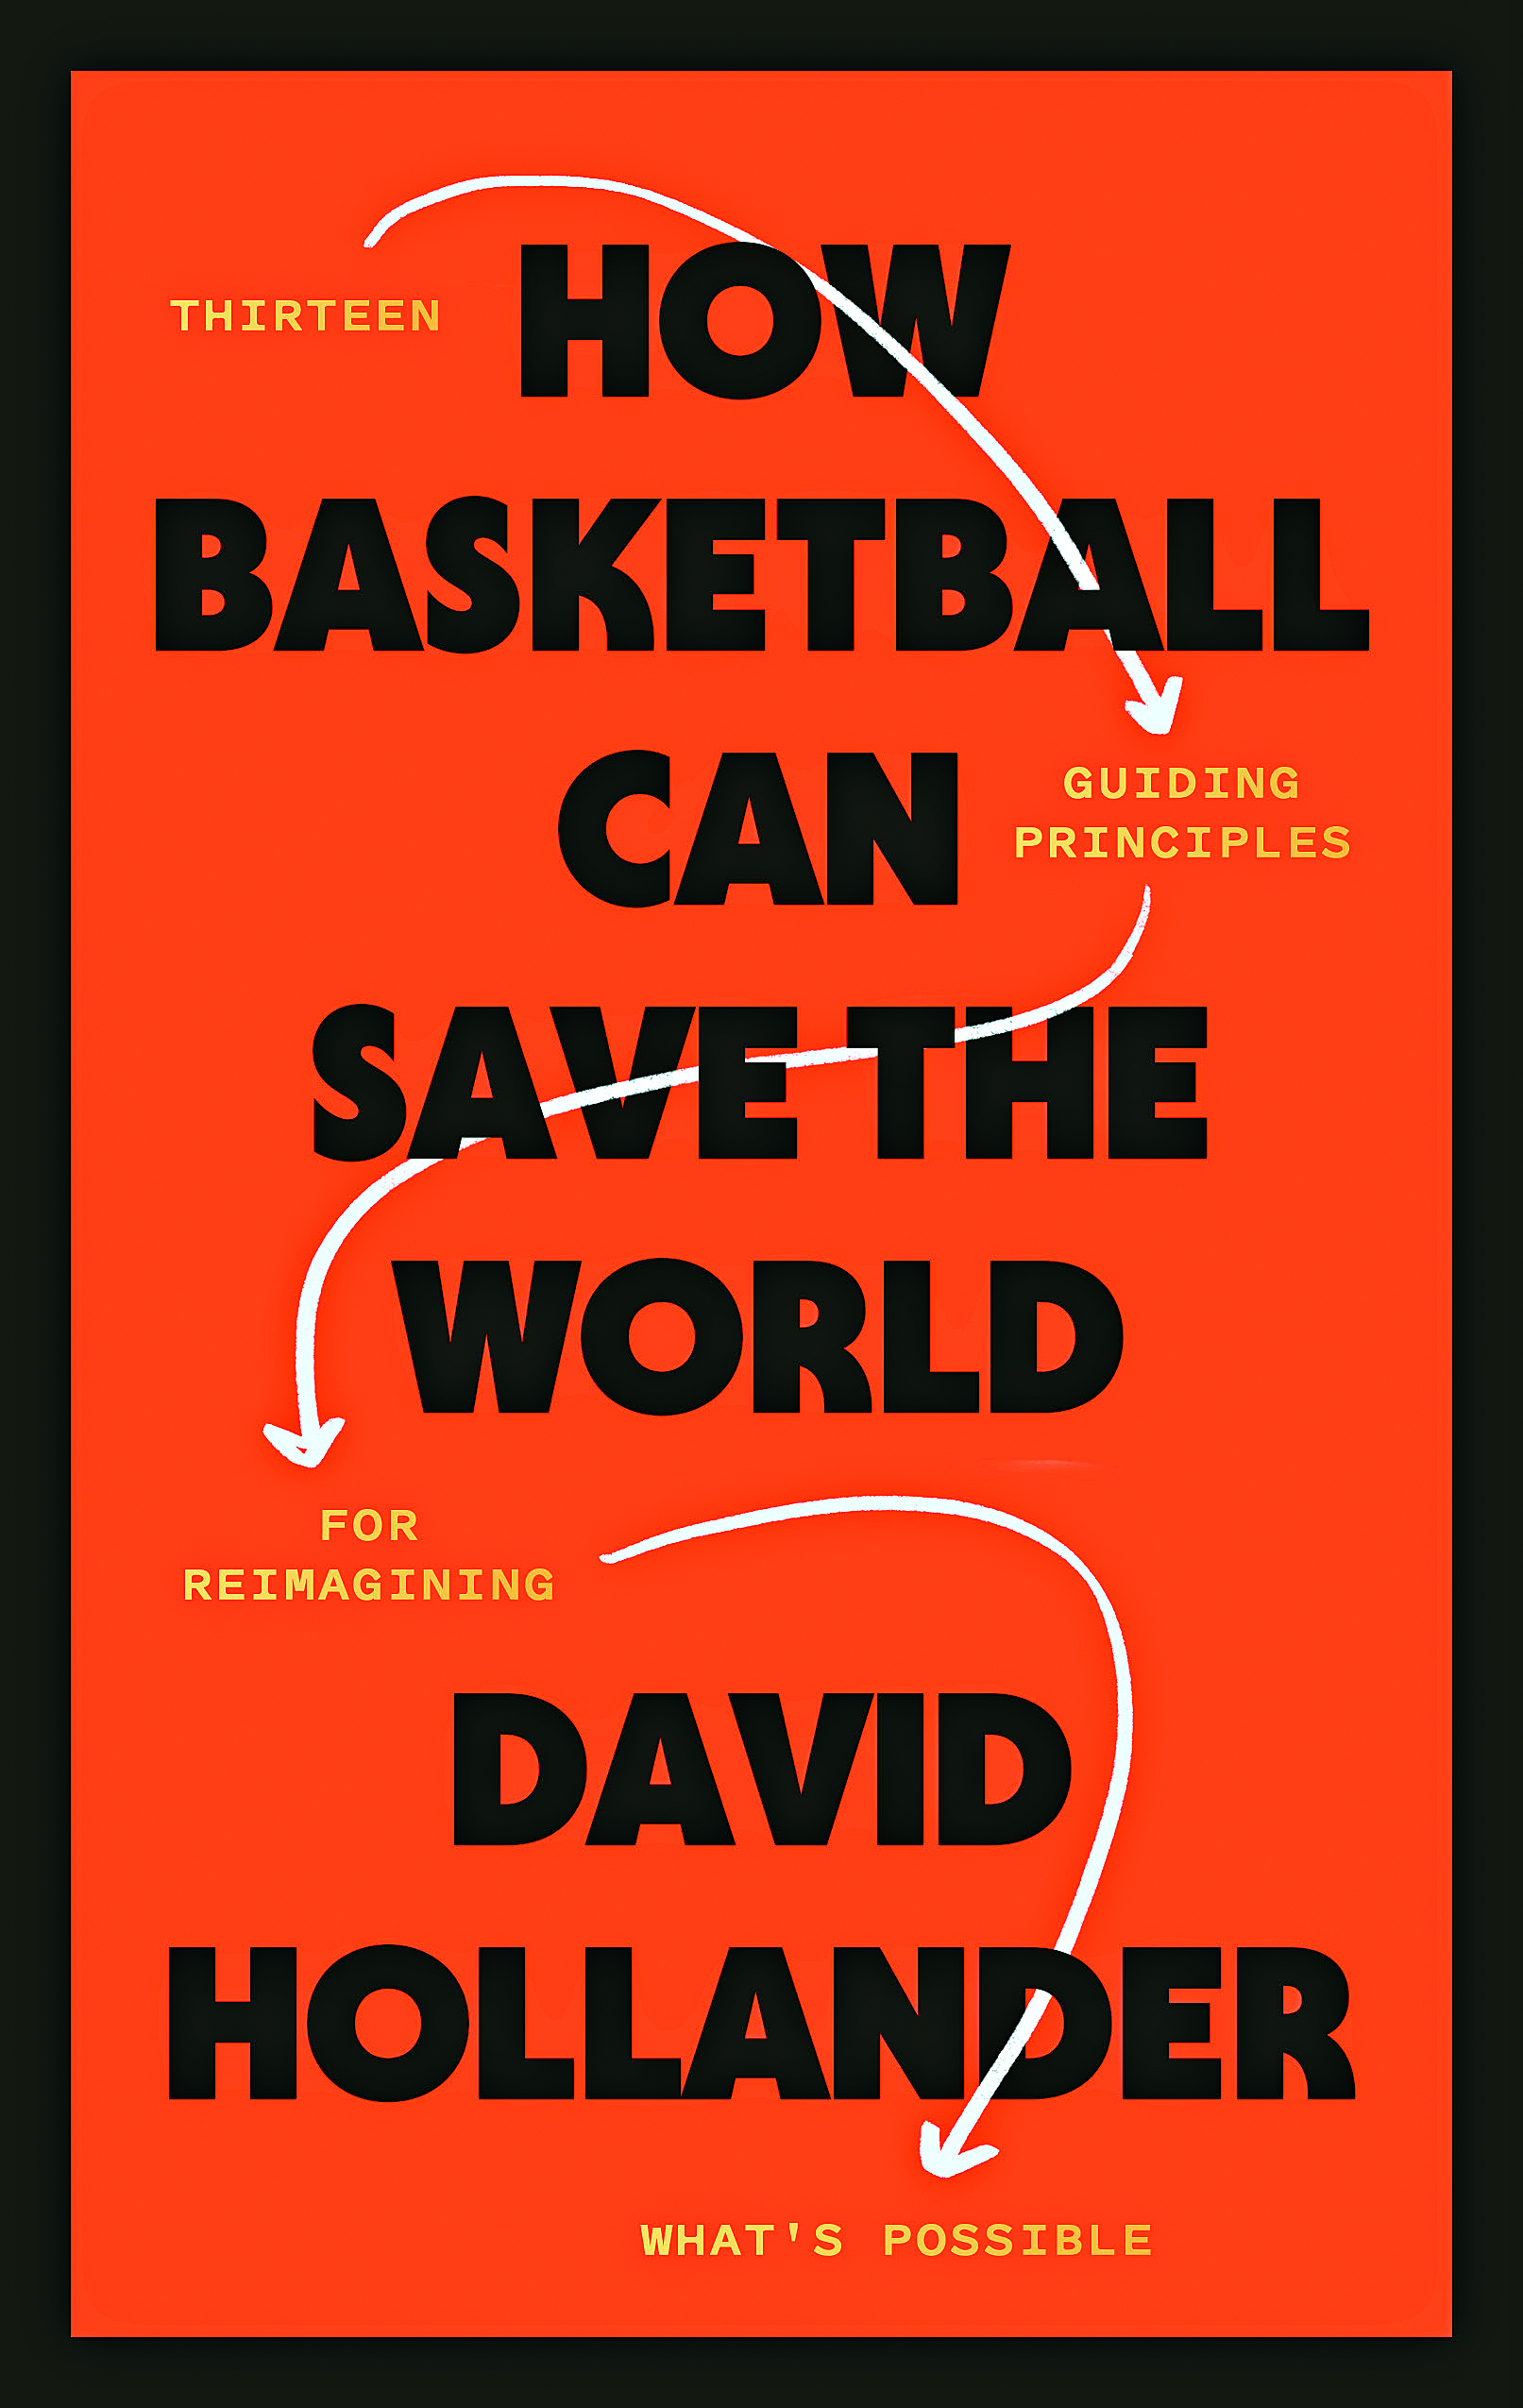 ‘How Basketball Can Save the World’: NYU Professor David Hollander Explores the Possibilities in New Book